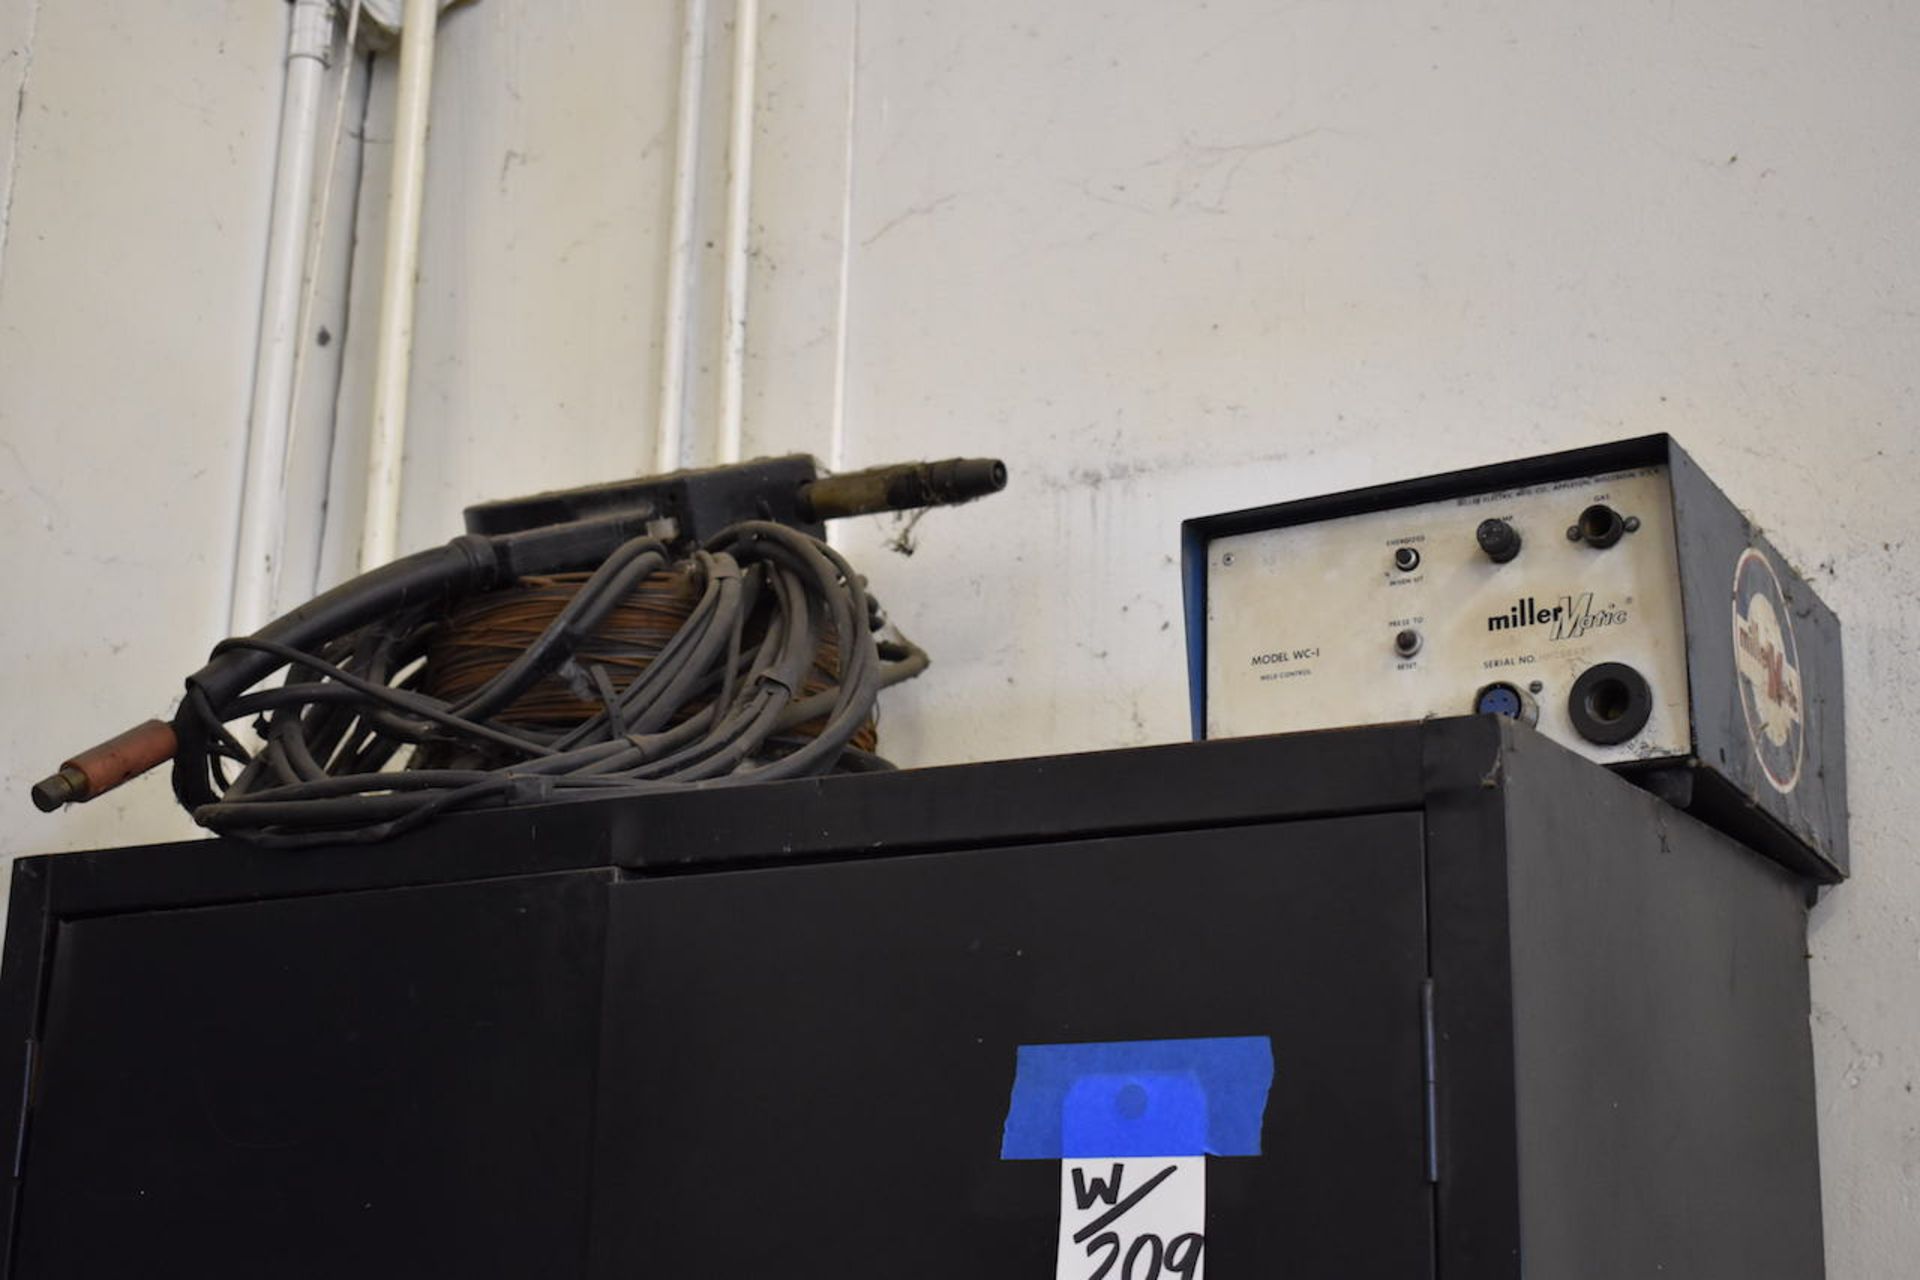 LOT: WELDING ACCESSORIES, INCLUDING; Welding Rod; Helmets; Gages; Flux Cabinets, Etc. - Image 5 of 7